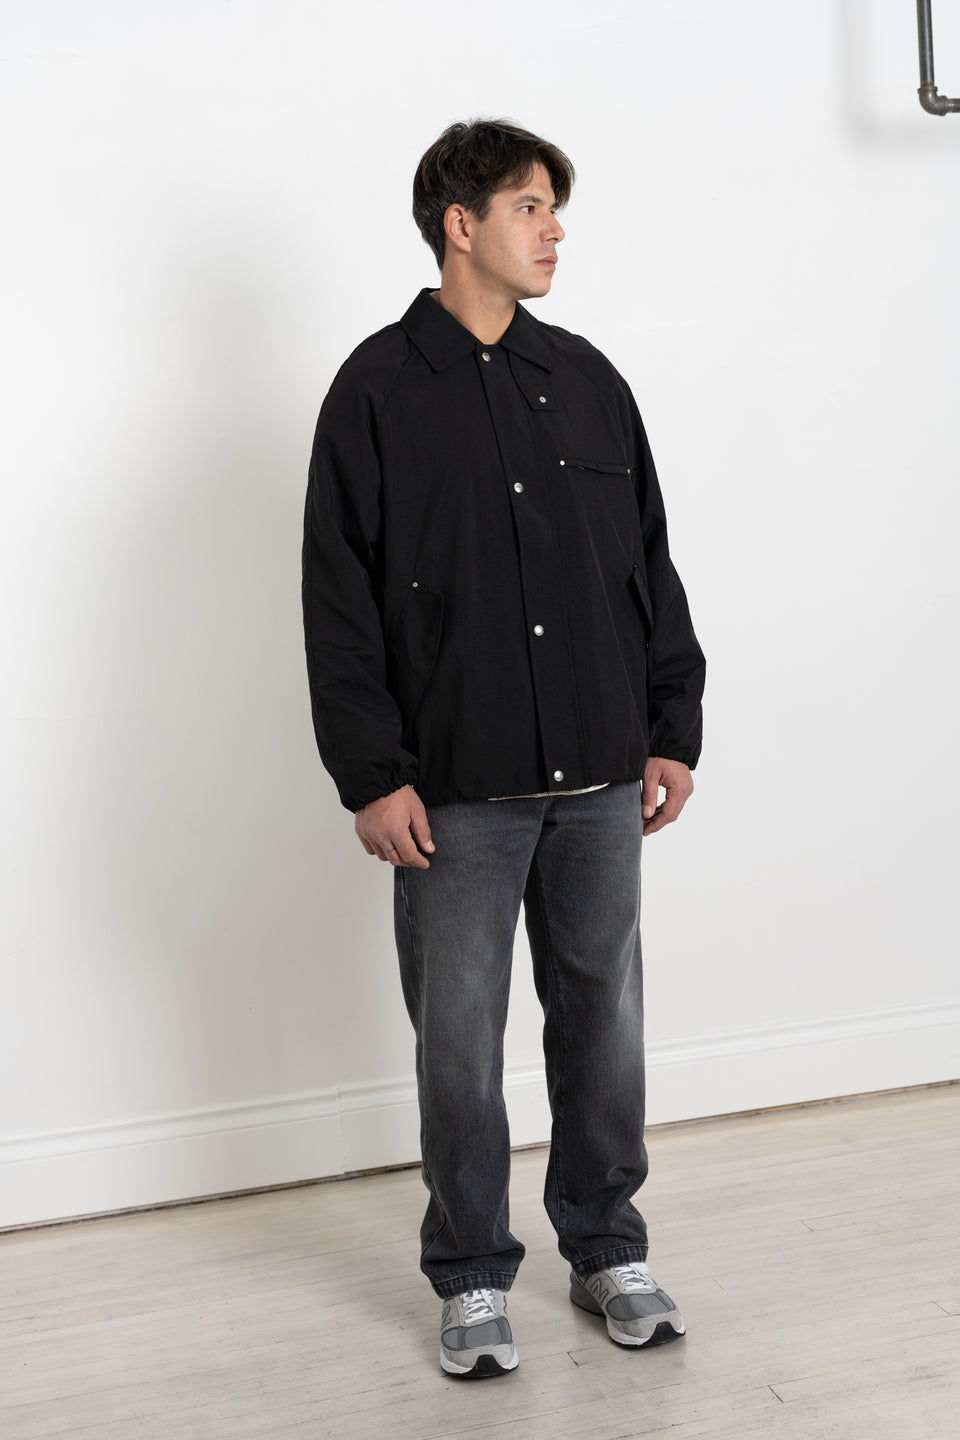 mfpen AW23 or FW23 Men's Collection Prestige Jacket Recycled Black Ripstop Recycled Nylon Calculus Victoria BC Canada